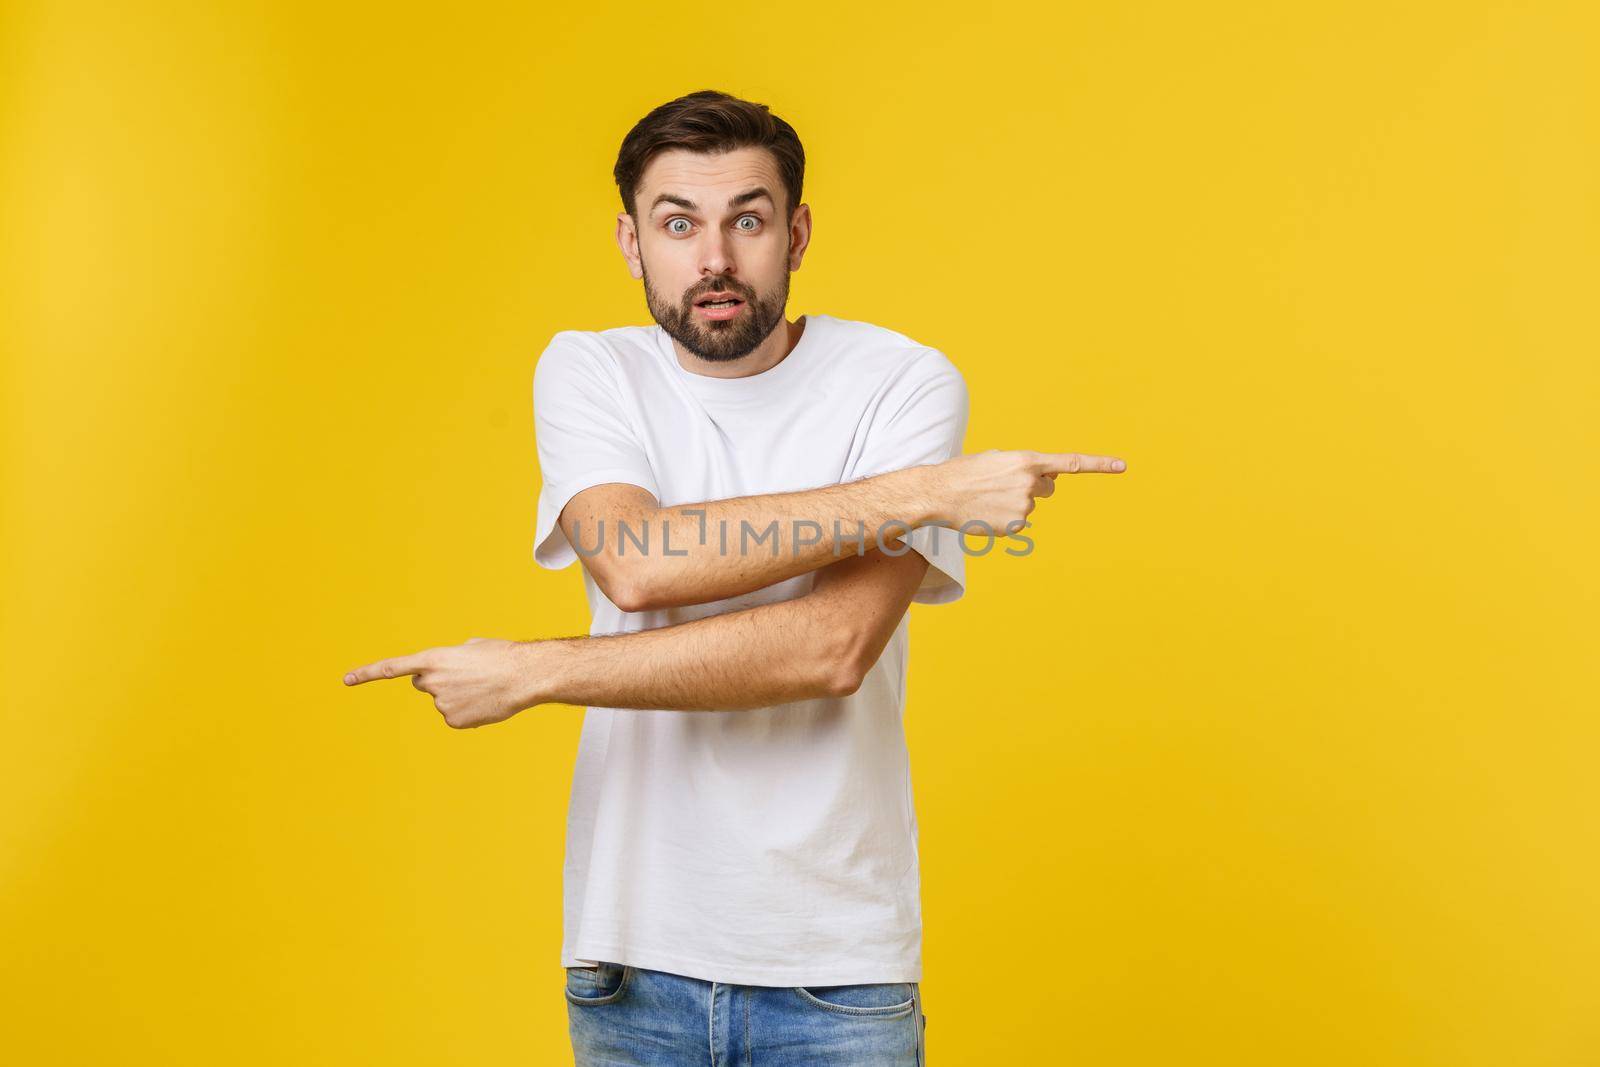 Handsome man over isolated yellow wall frustrated and pointing to the front